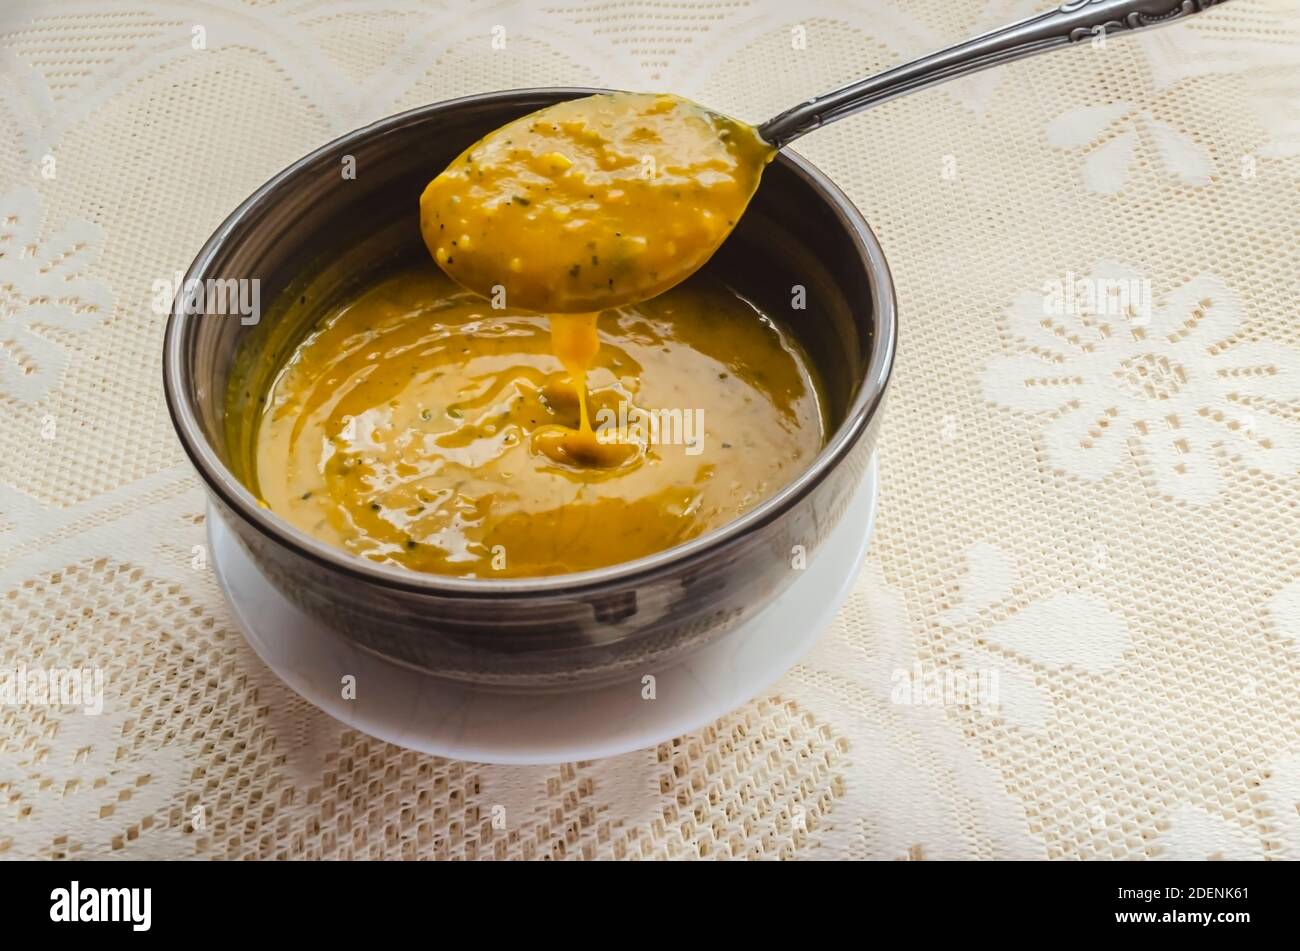 A spoon is lifting thick smooth pumpkin soup from a bowl that is in a small white plate on a lace tablecloth. Stock Photo